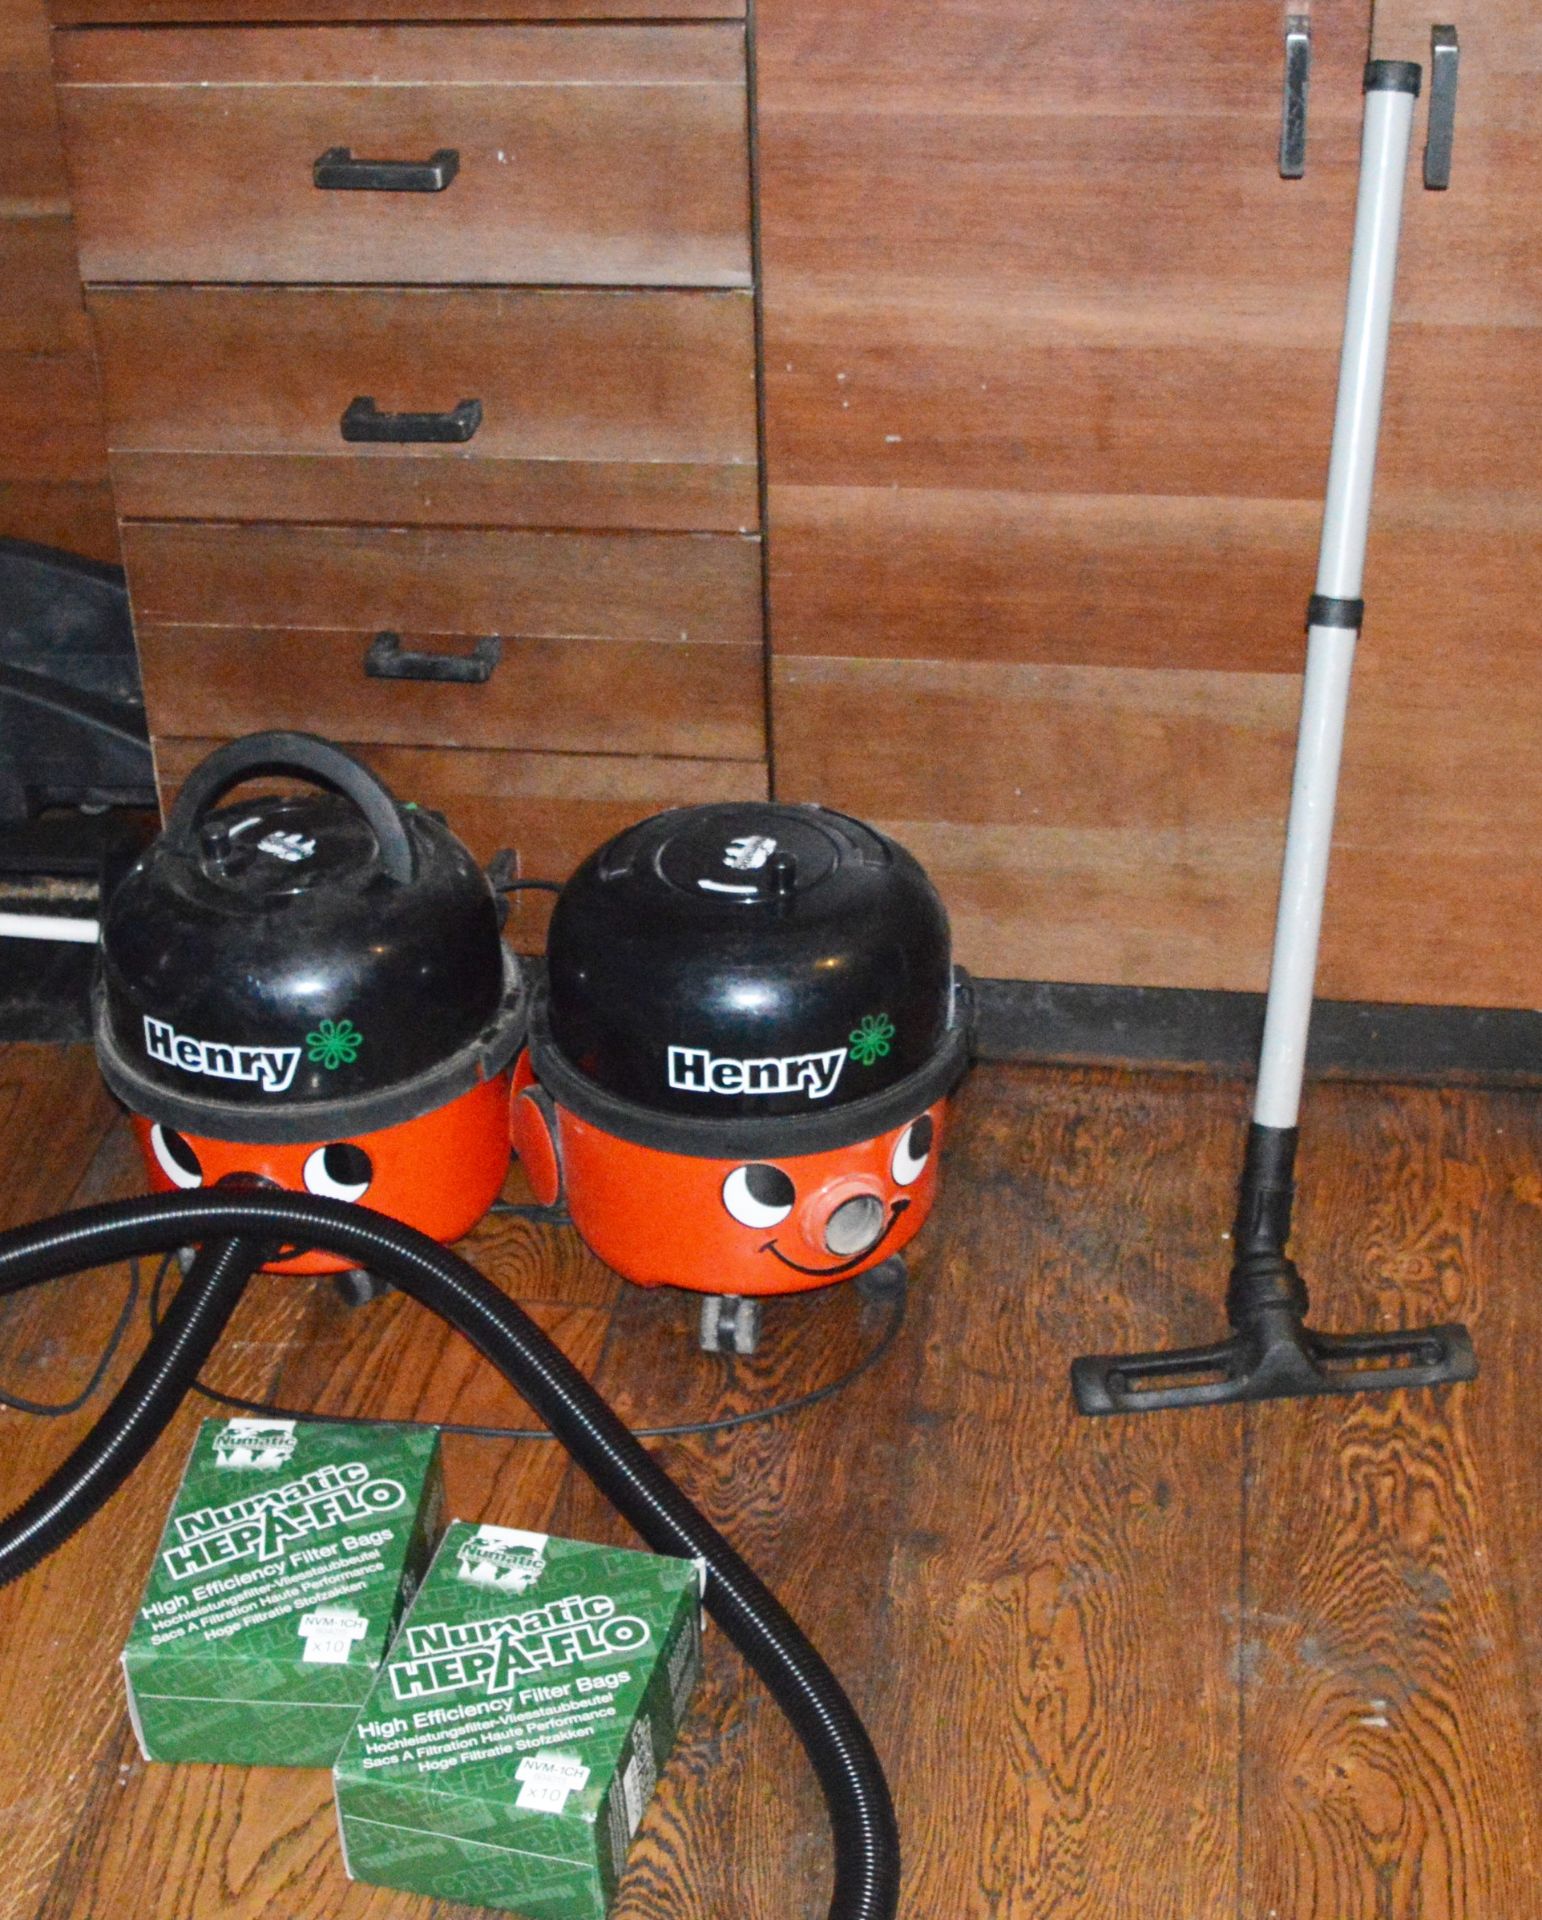 2 x Numatic Henry Hoovers With Accessories and Spare Hoover Bags - CL350 - Location: Cardiff CF10 - Image 2 of 3